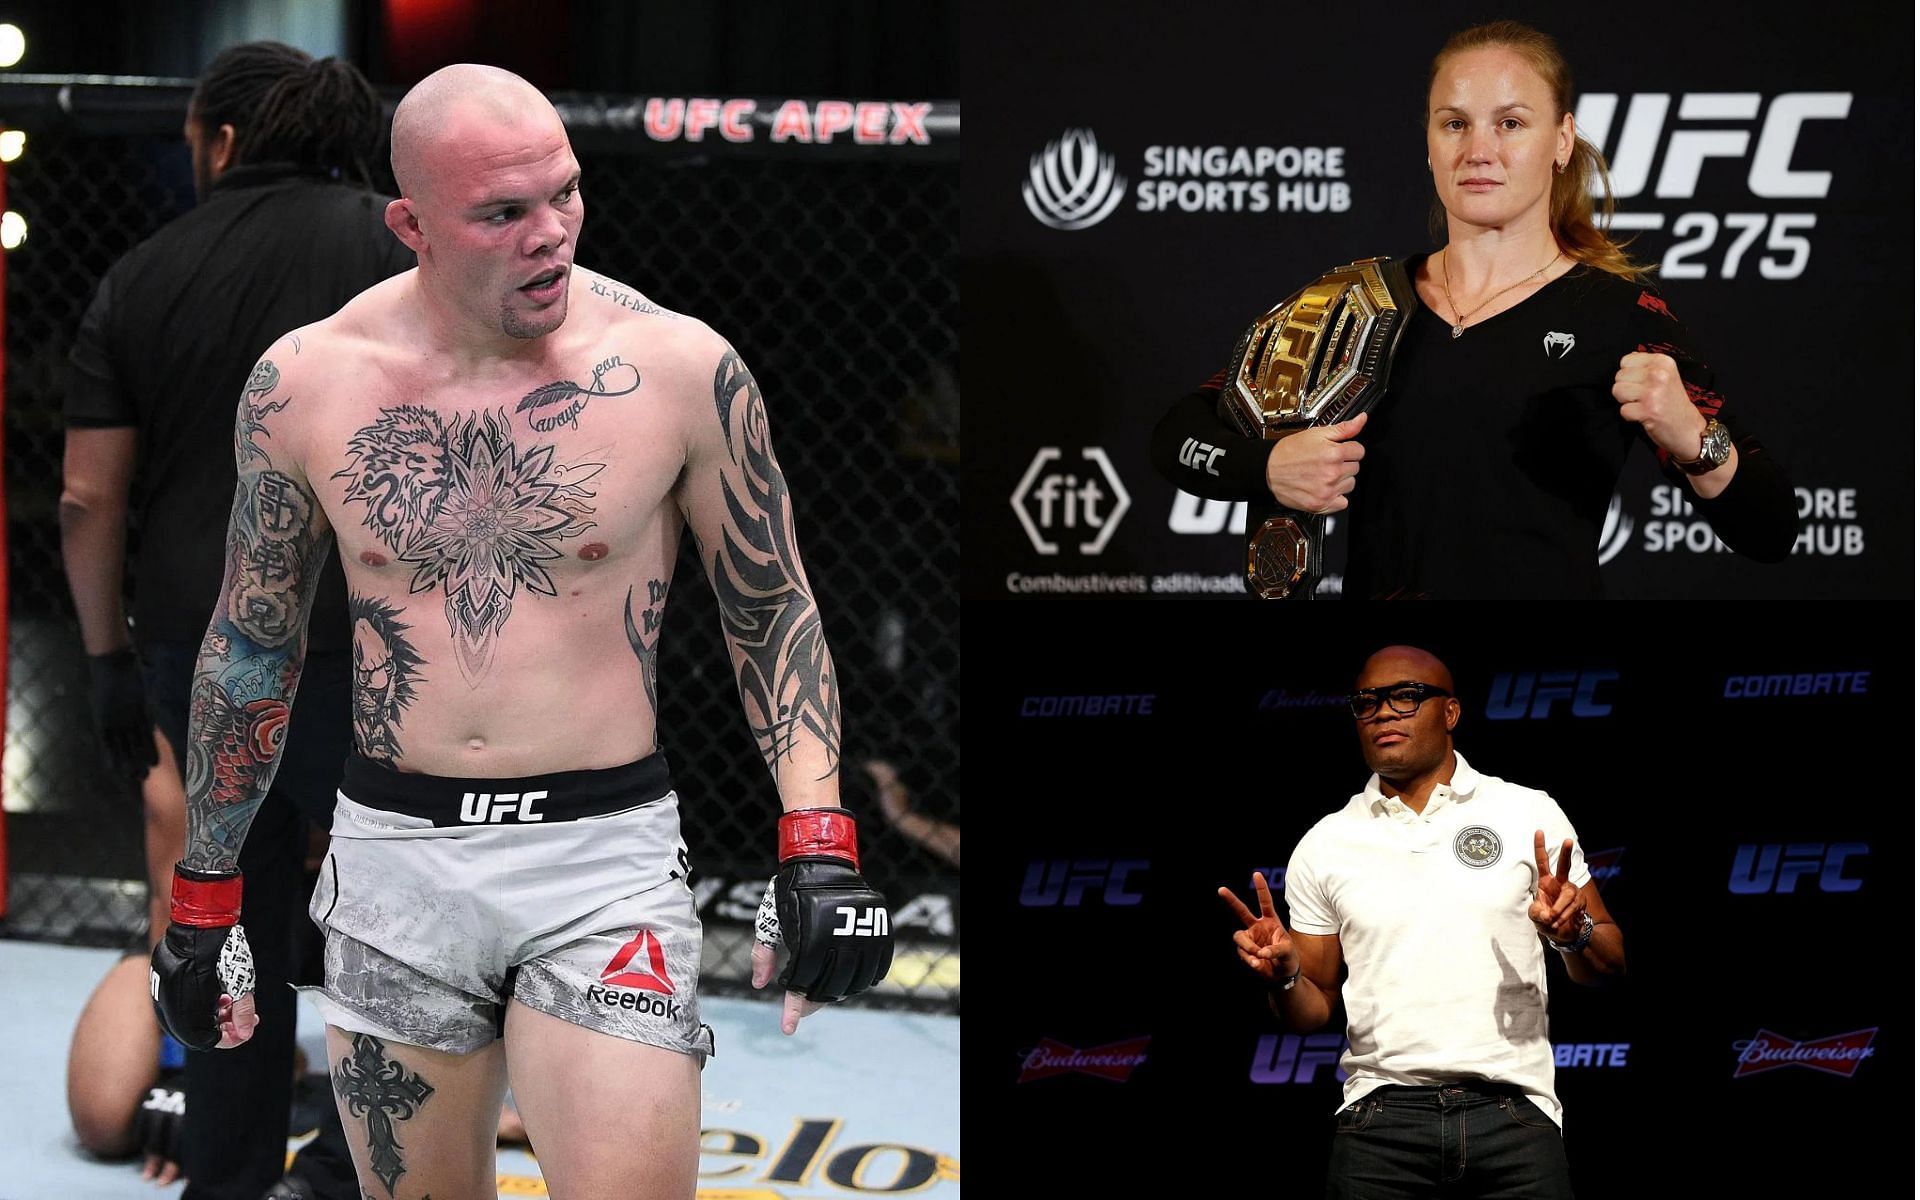 Anthony Smith (left), Valentina Shevchenko (top right), Anderson Silva (bottom right) [Images courtesy of Getty]